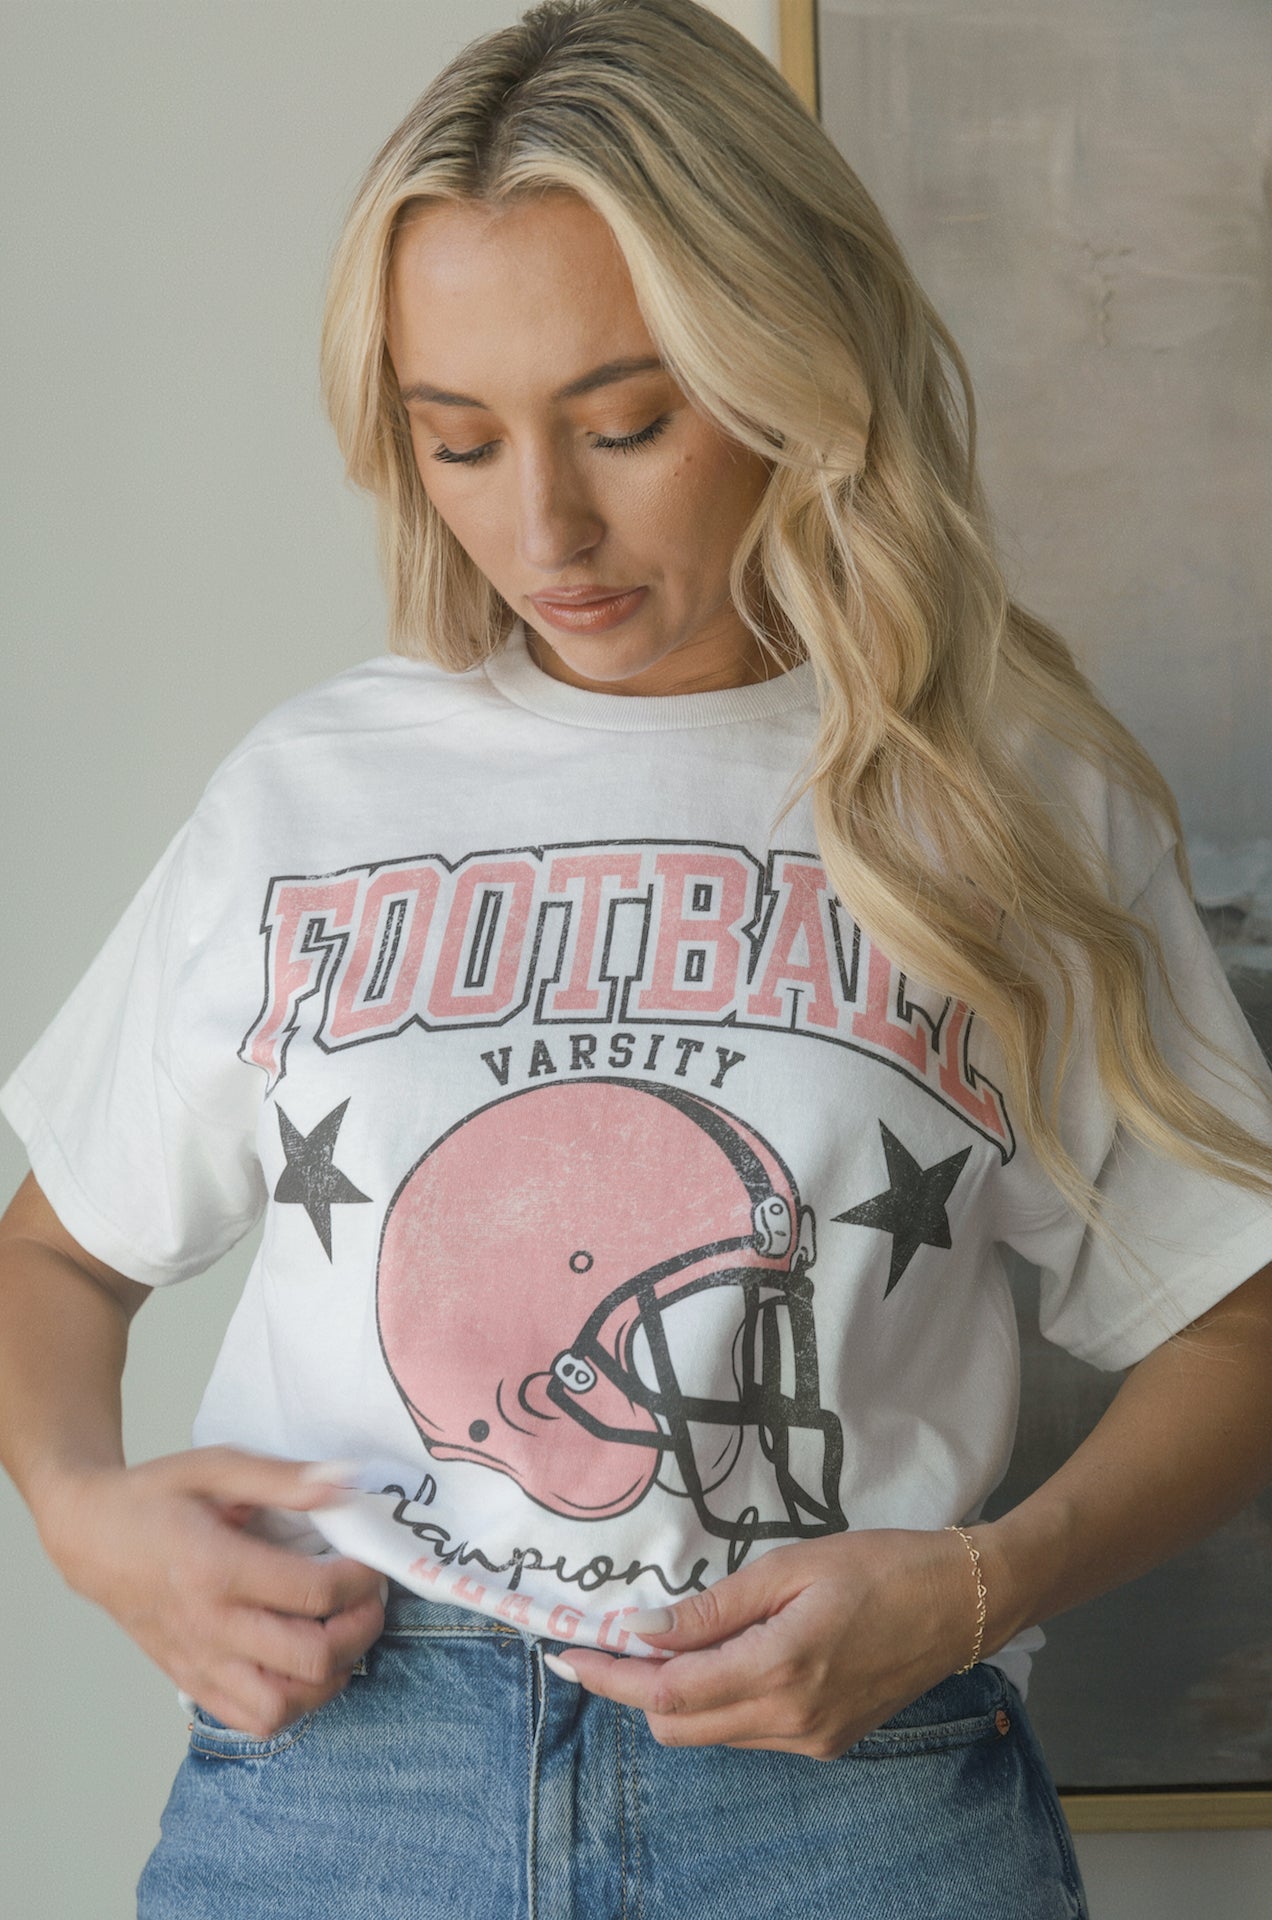 white football graphic tee with a pink football helmet design and football varsity champion league graphic